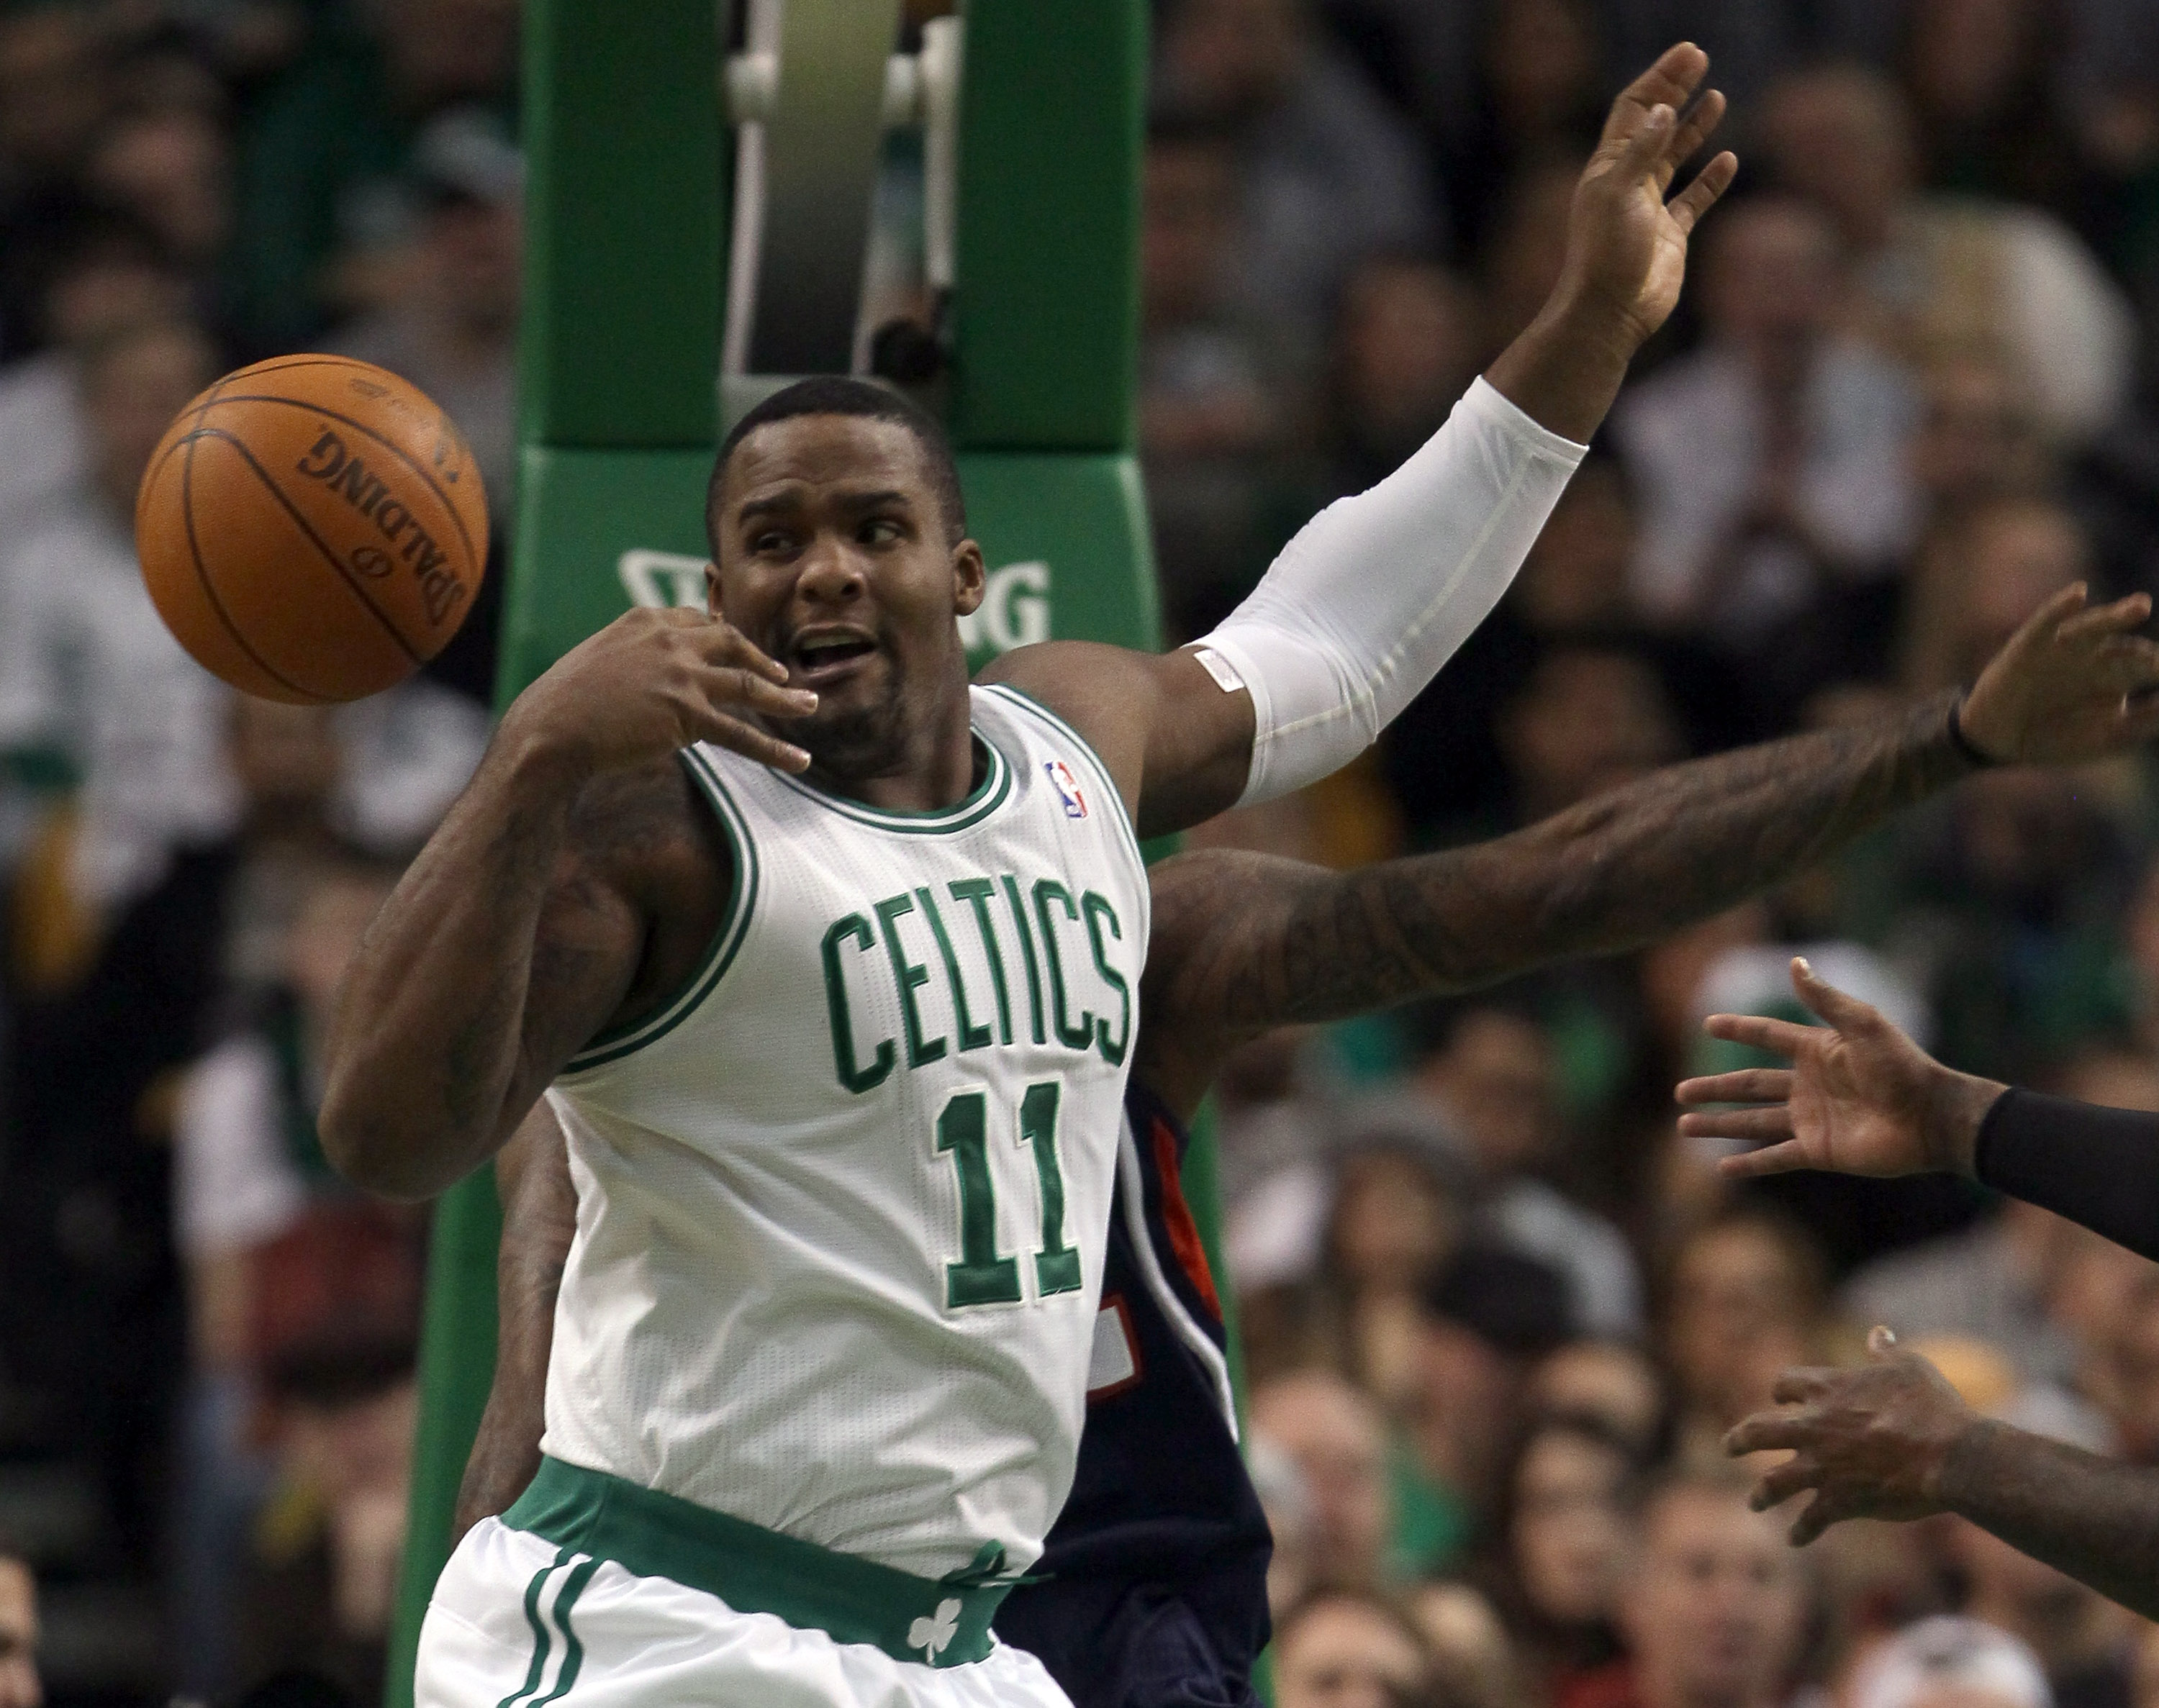 BOSTON, MA - DECEMBER 16:  Glen Davis #11 of the Boston Celtics tries to grab the loose ball in the first half against the Atlanta Hawks on December 16, 2010 at the TD Garden in Boston, Massachusetts. NOTE TO USER: User expressly acknowledges and agrees t